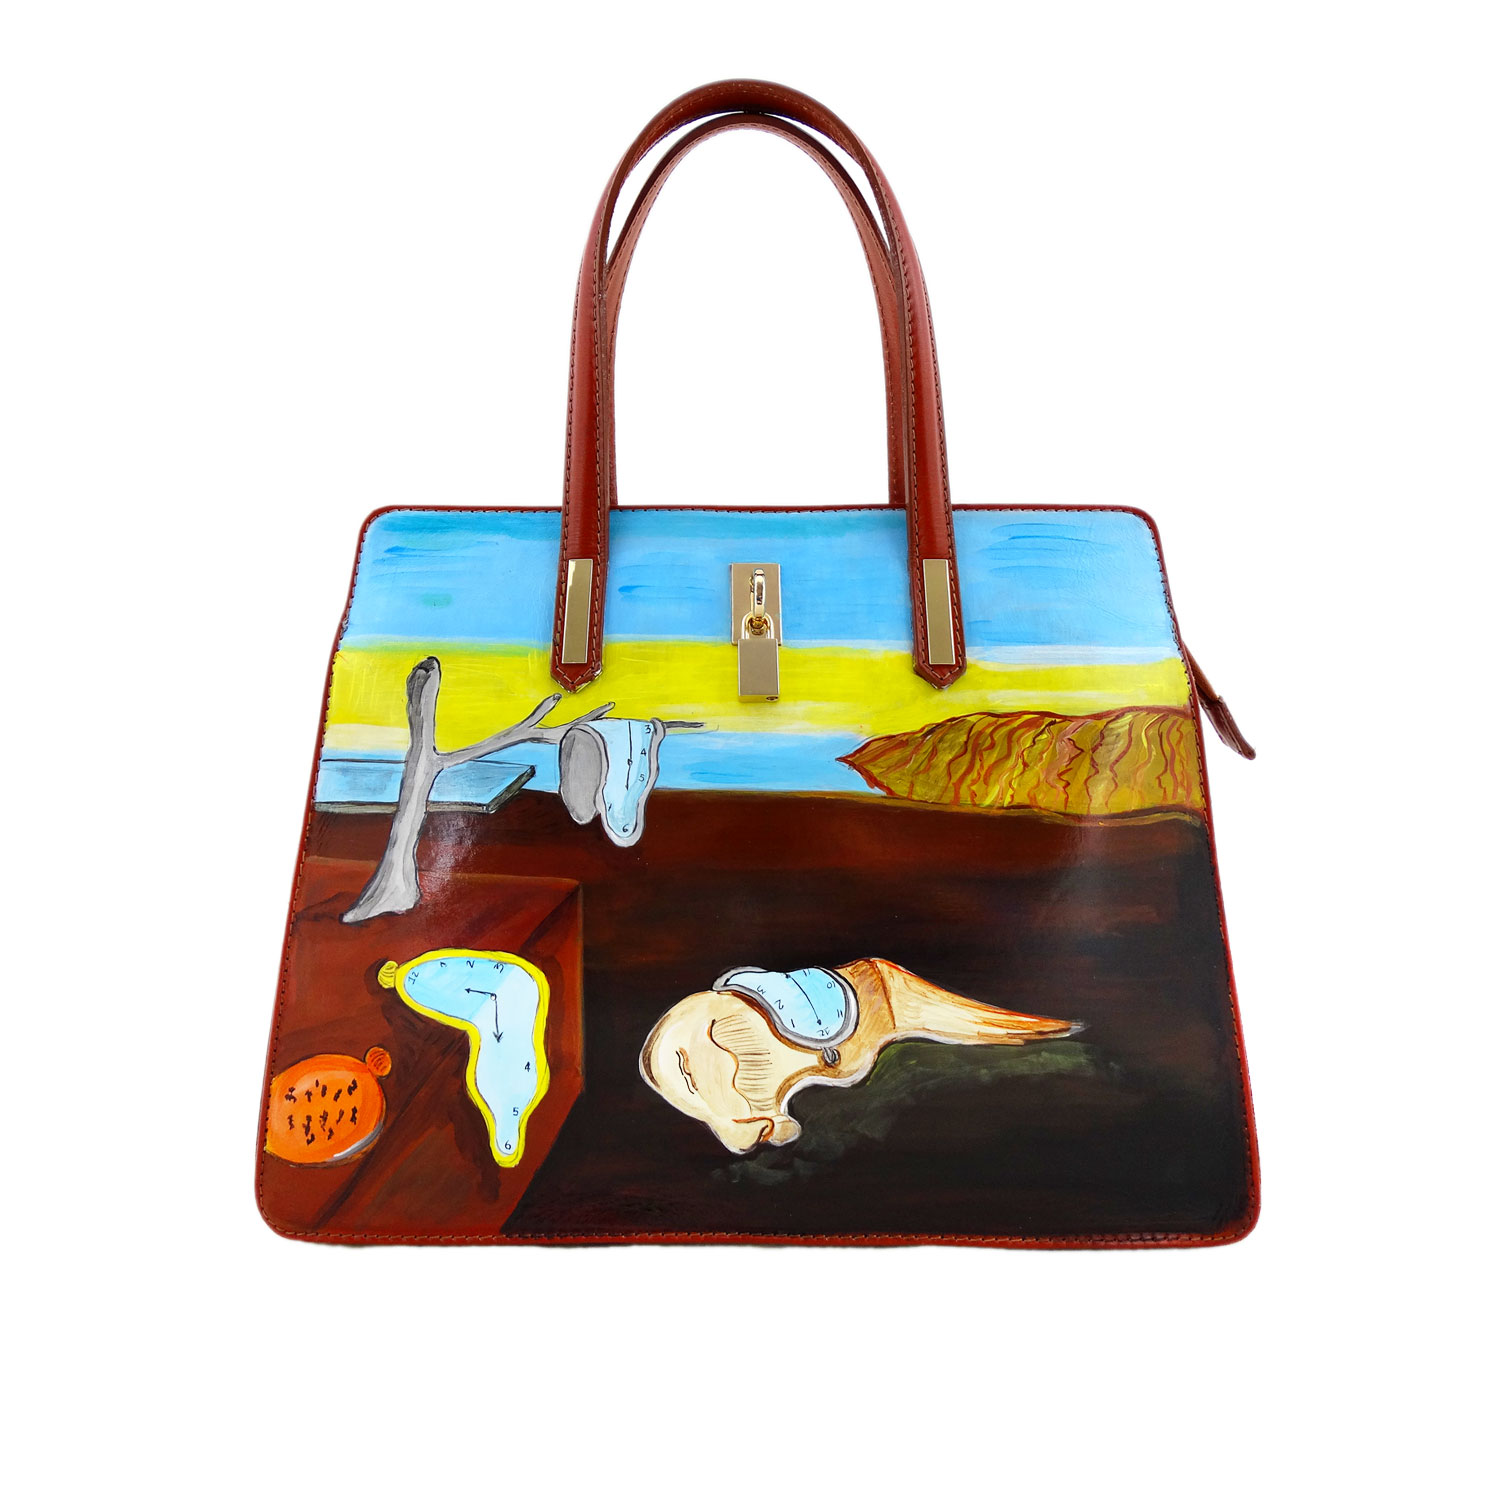 Hand painted bag - The Persistence of Memory by Dalì